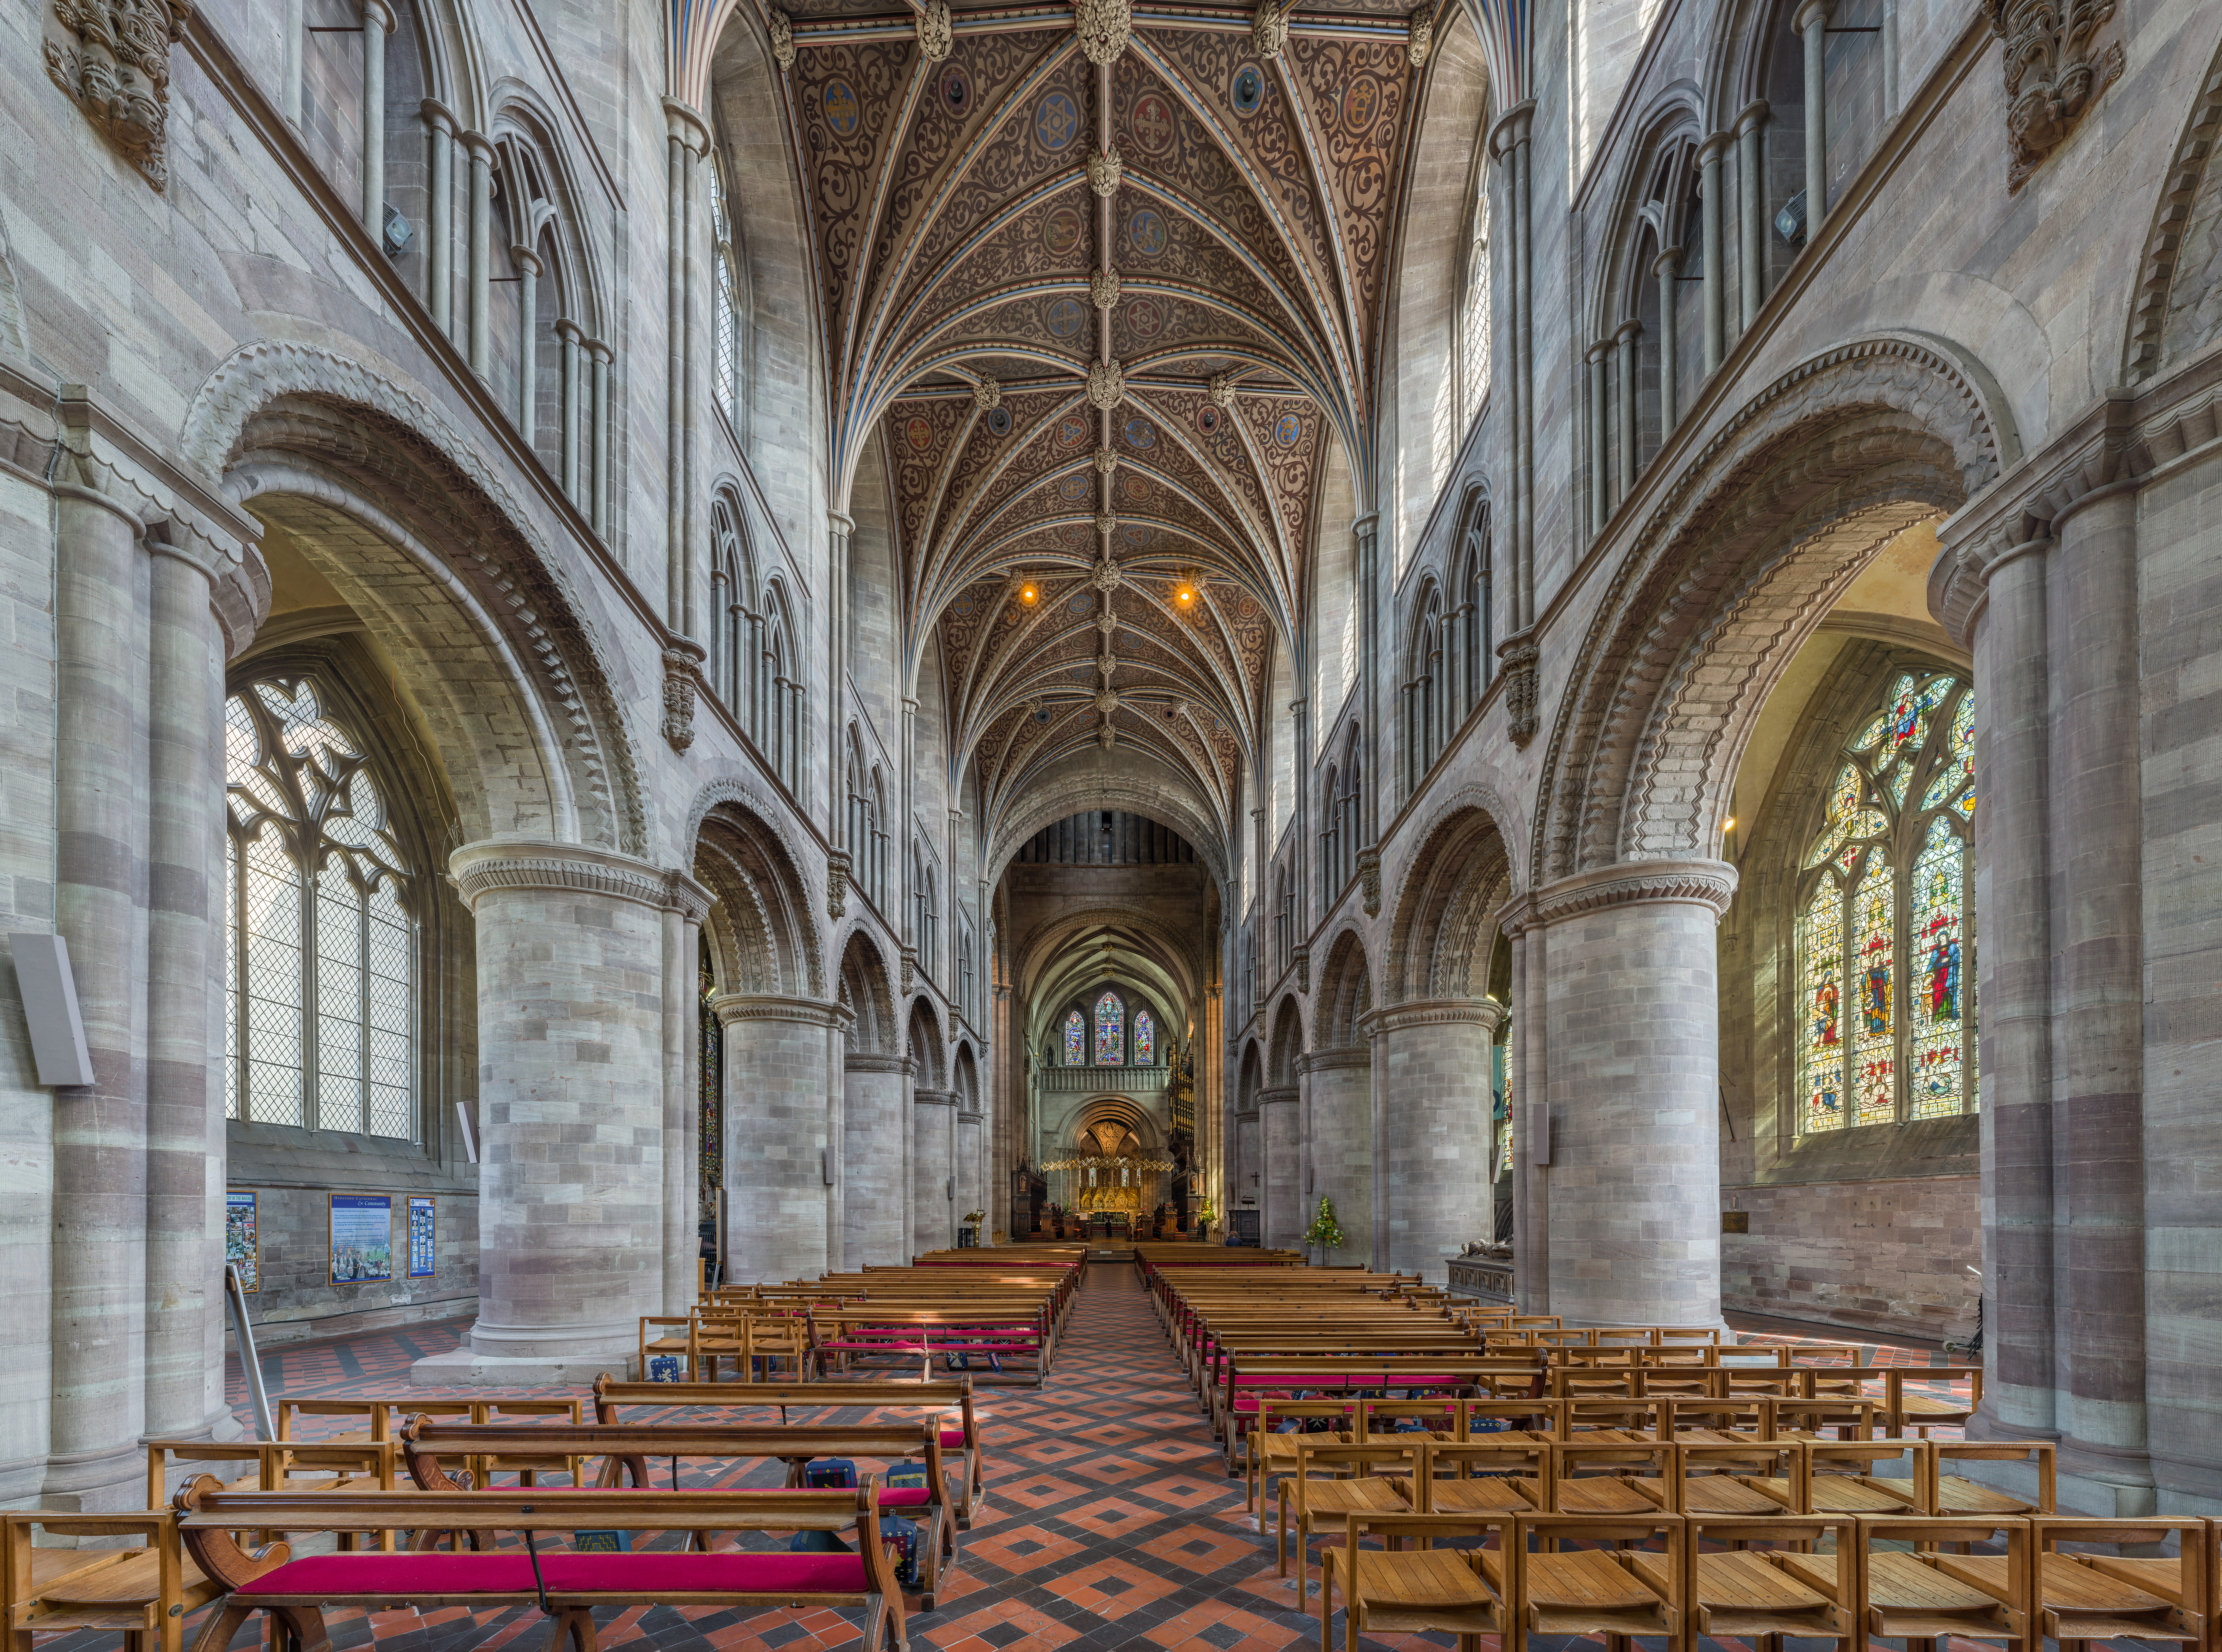 The Hereford cathedral is one of the most impressive in England. Image credits: Wiki Commons.